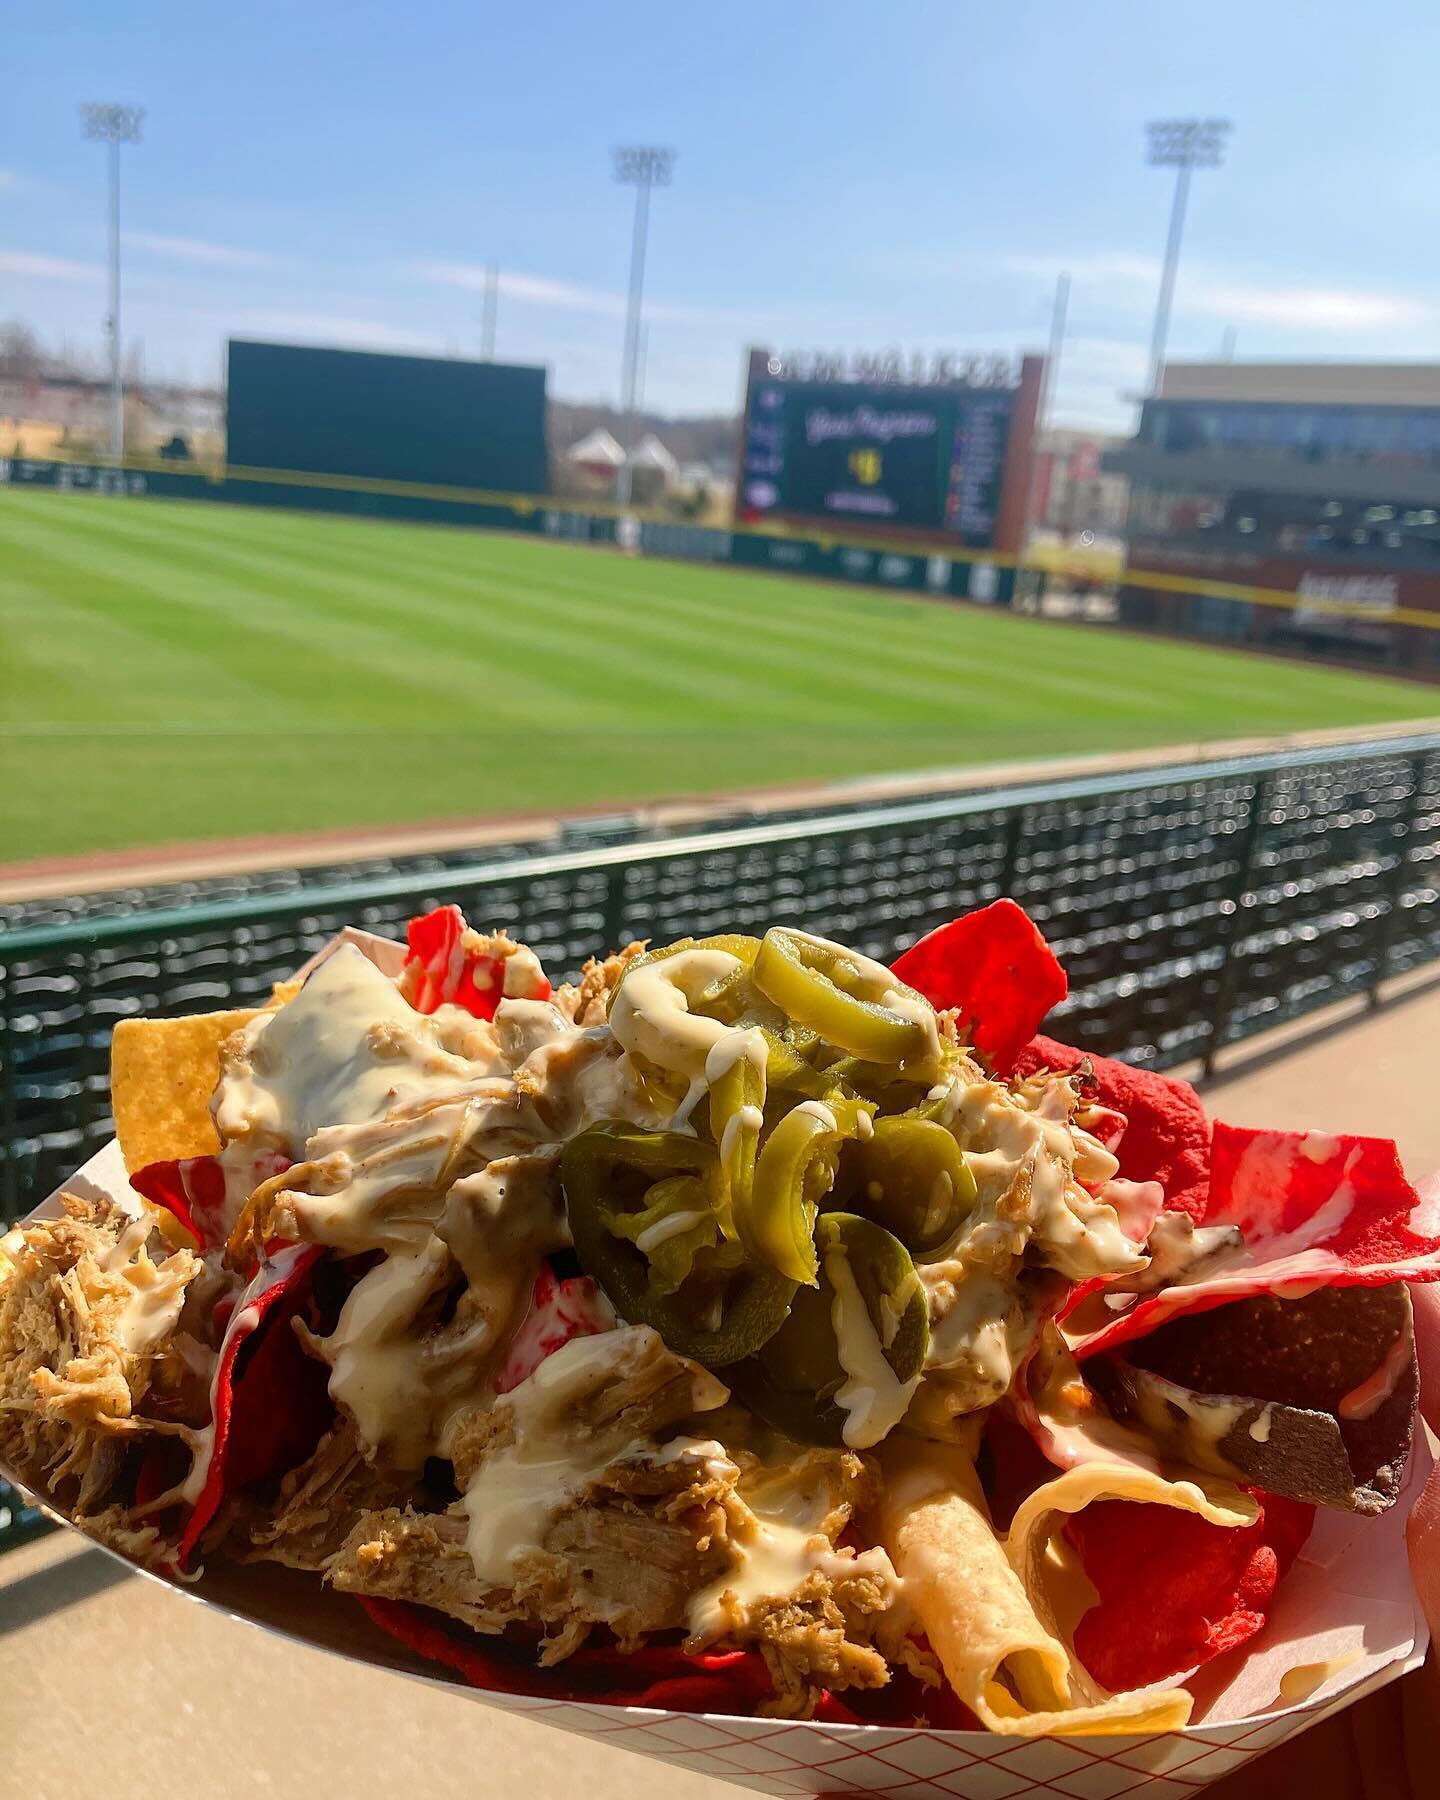 Finish your weekend off right at Baum Stadium! Top it off with your favorite pulled pork fry or nacho!😁 You won&rsquo;t be disappointed!